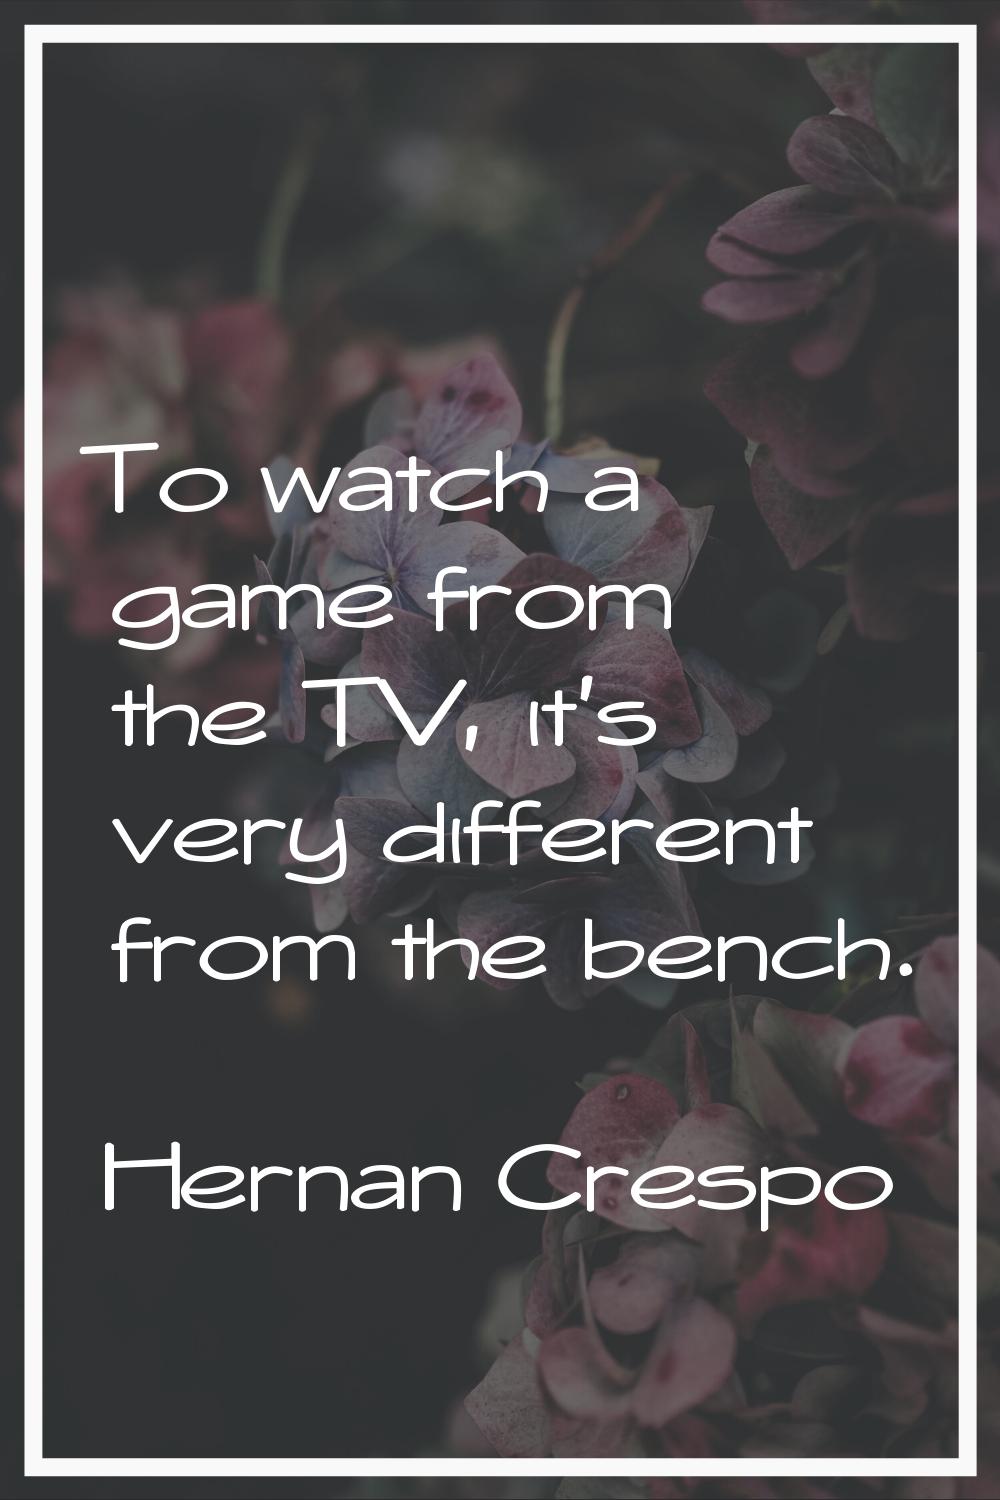 To watch a game from the TV, it's very different from the bench.